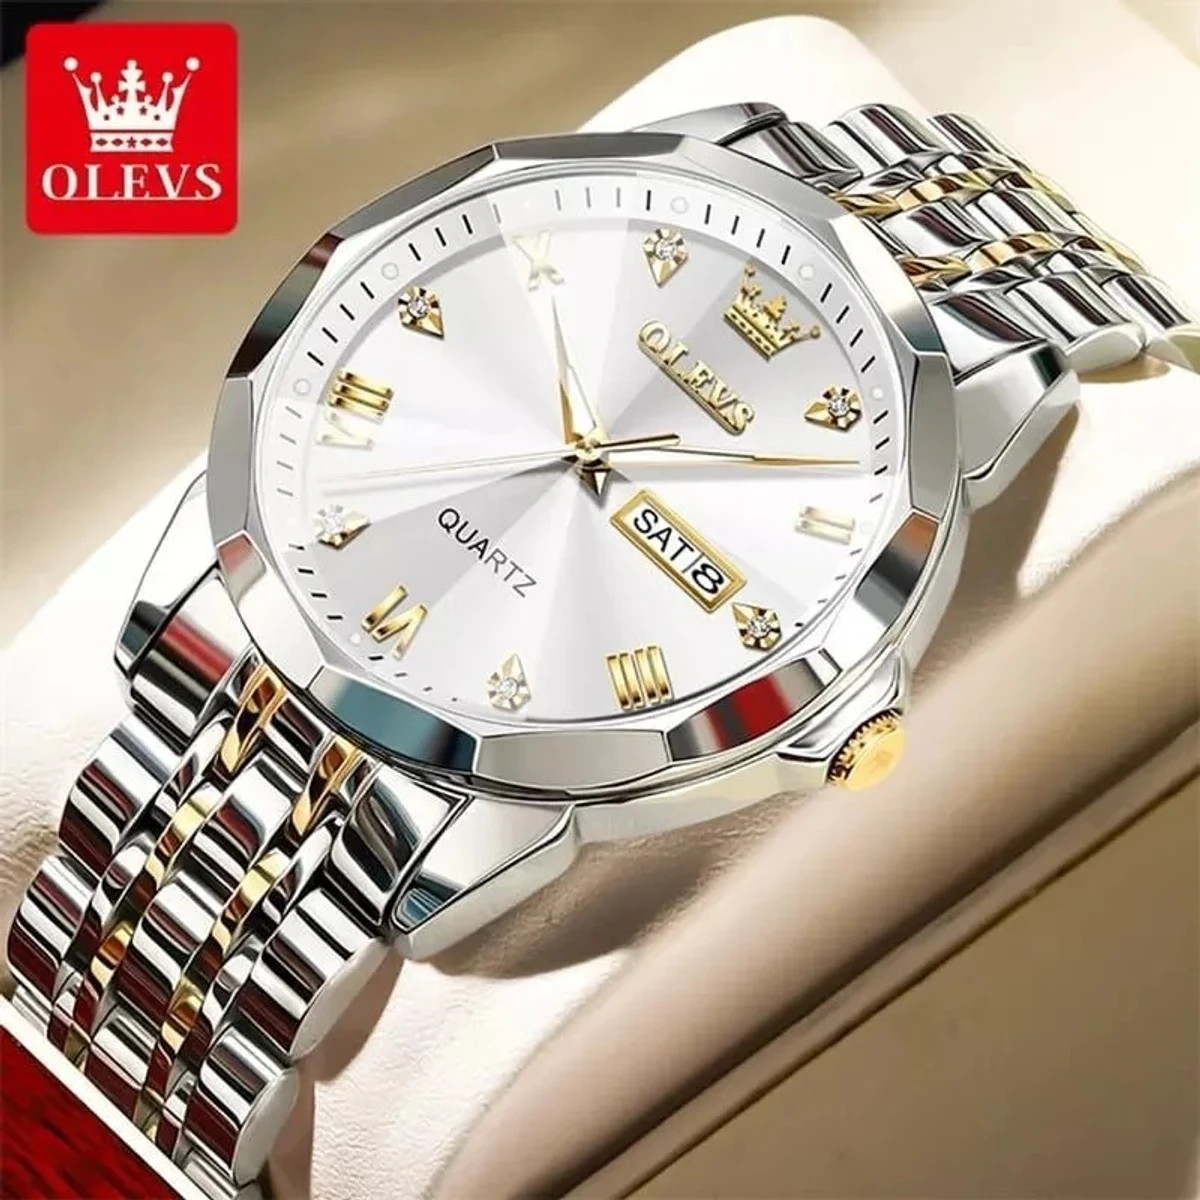 OLEVS MODEL 9931 Watch for Men Stainless Steel Watches - 9941 TOTON AR DIAL WHITE - MAN  WATCH